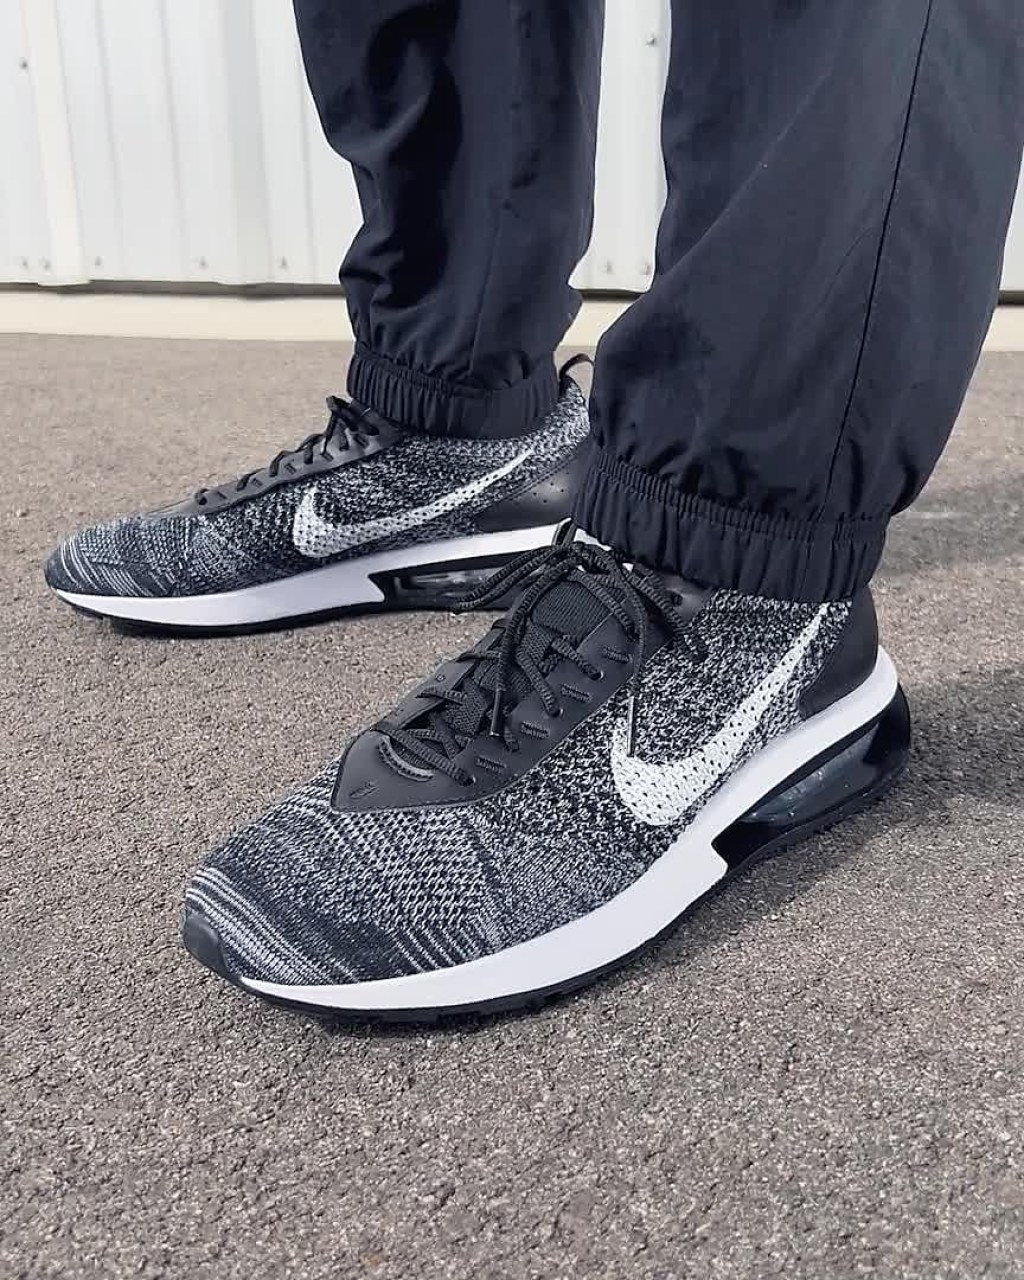 Picture of: Nike Air Max Flyknit Racer Herrenschuh